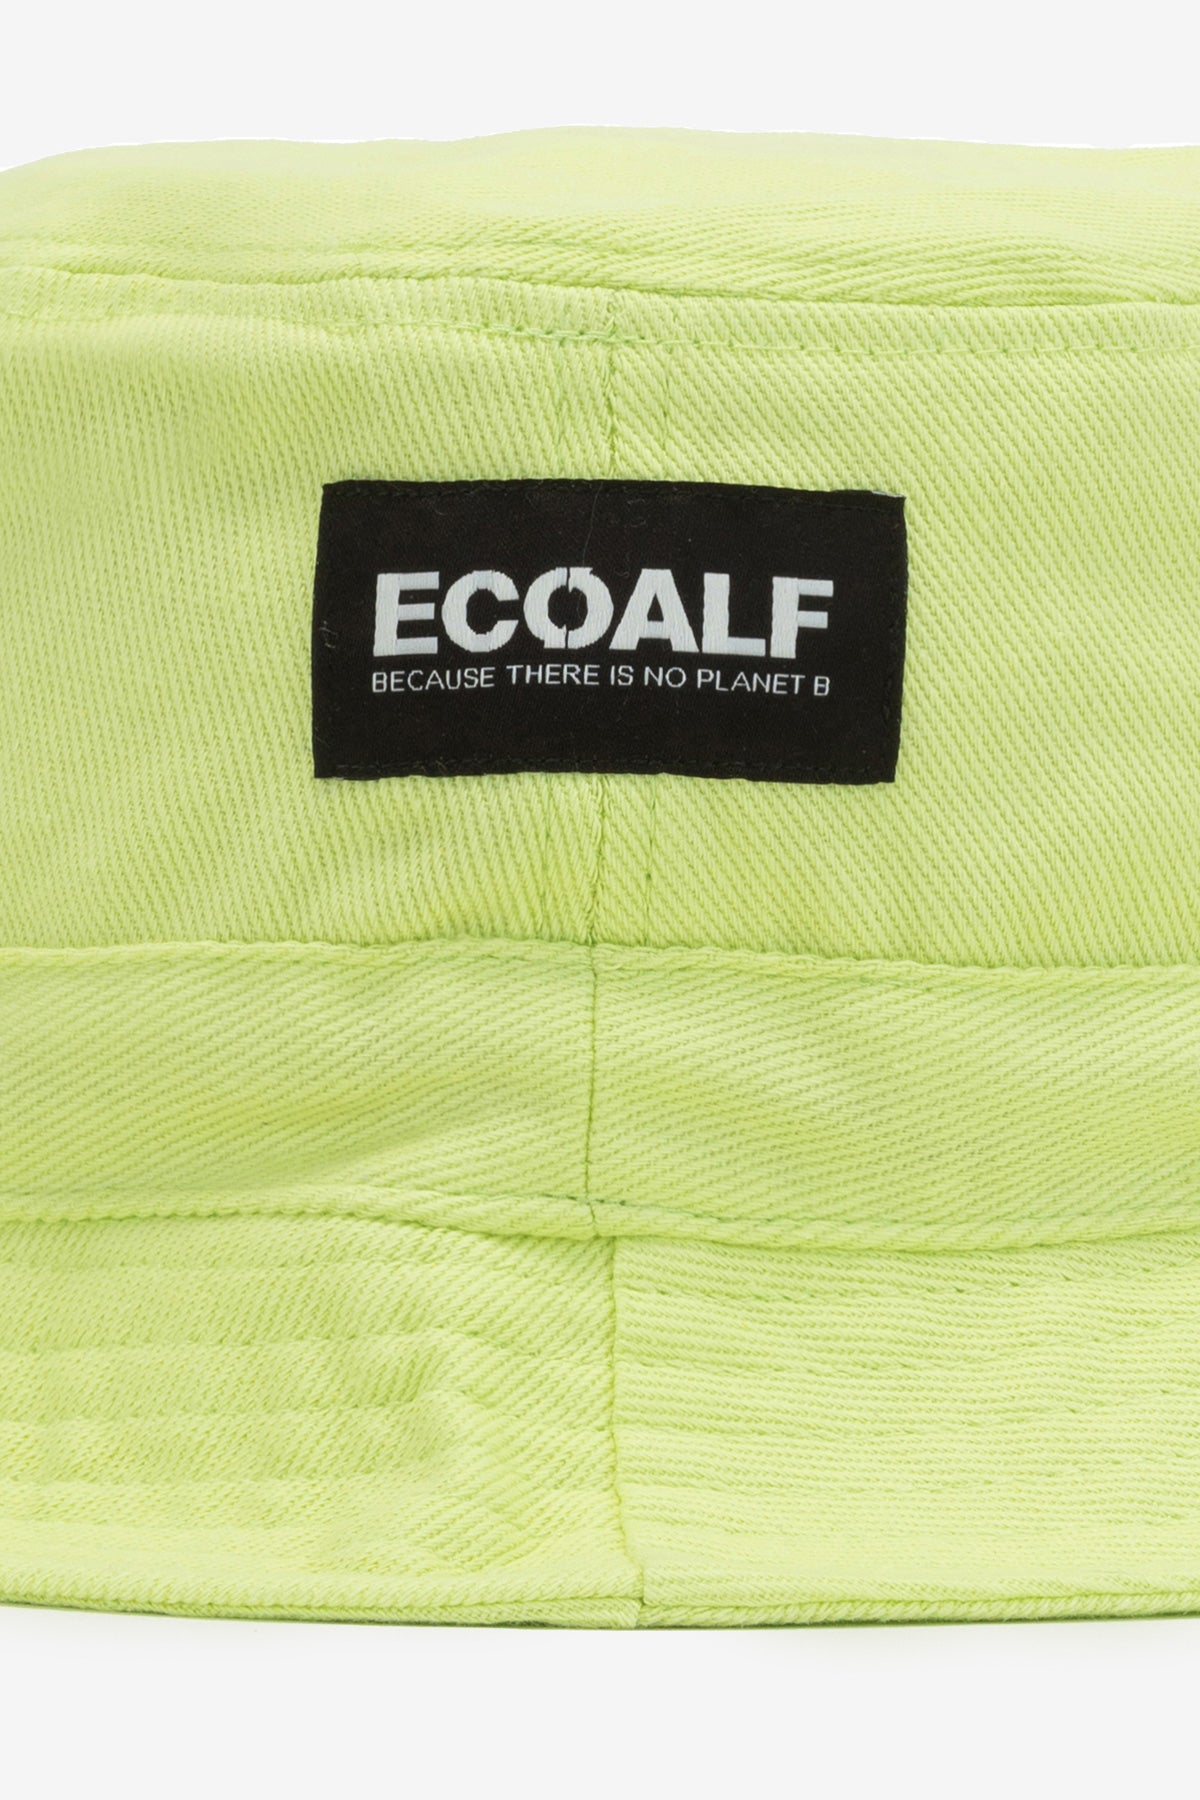 LIME GREEN FISHER BAS HAT